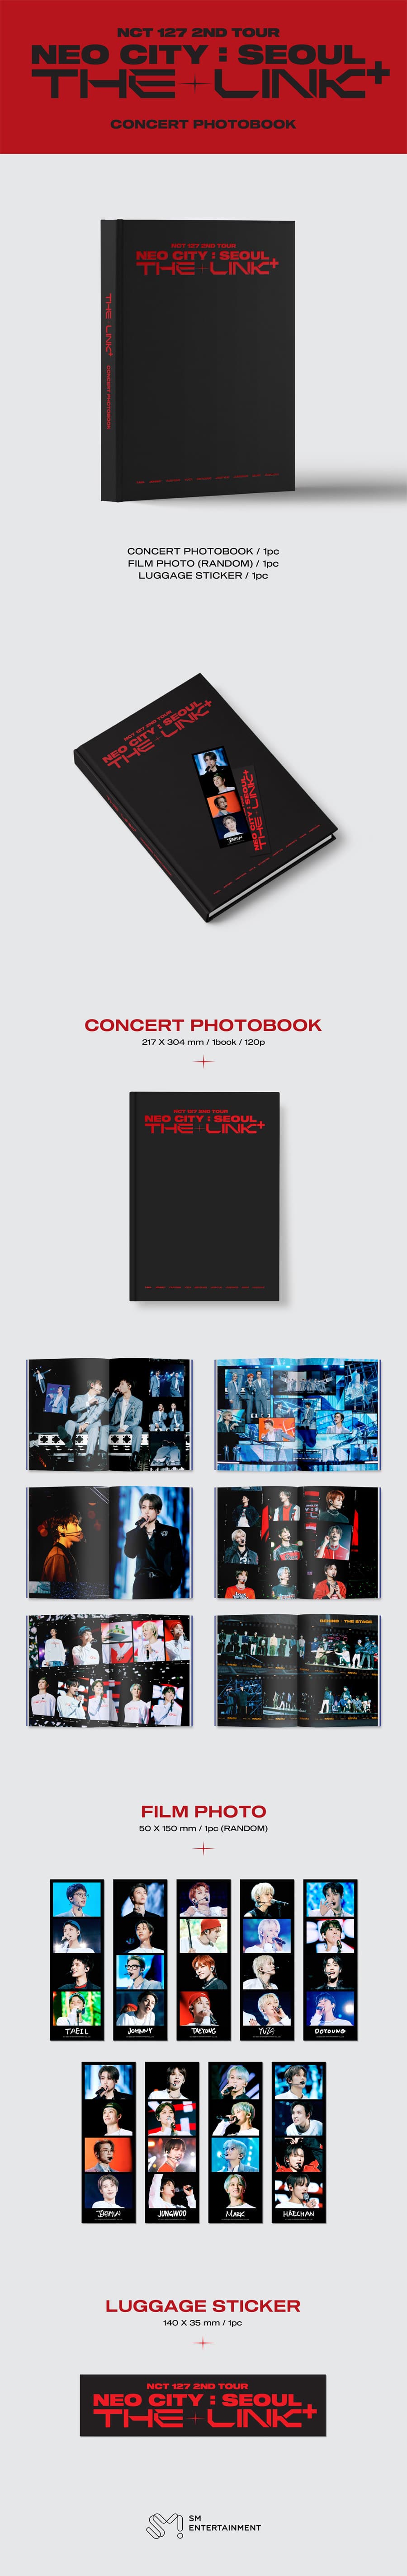 nct-127-2nd-tour-neo-city-seoul-the-link-photo-book-wholesale